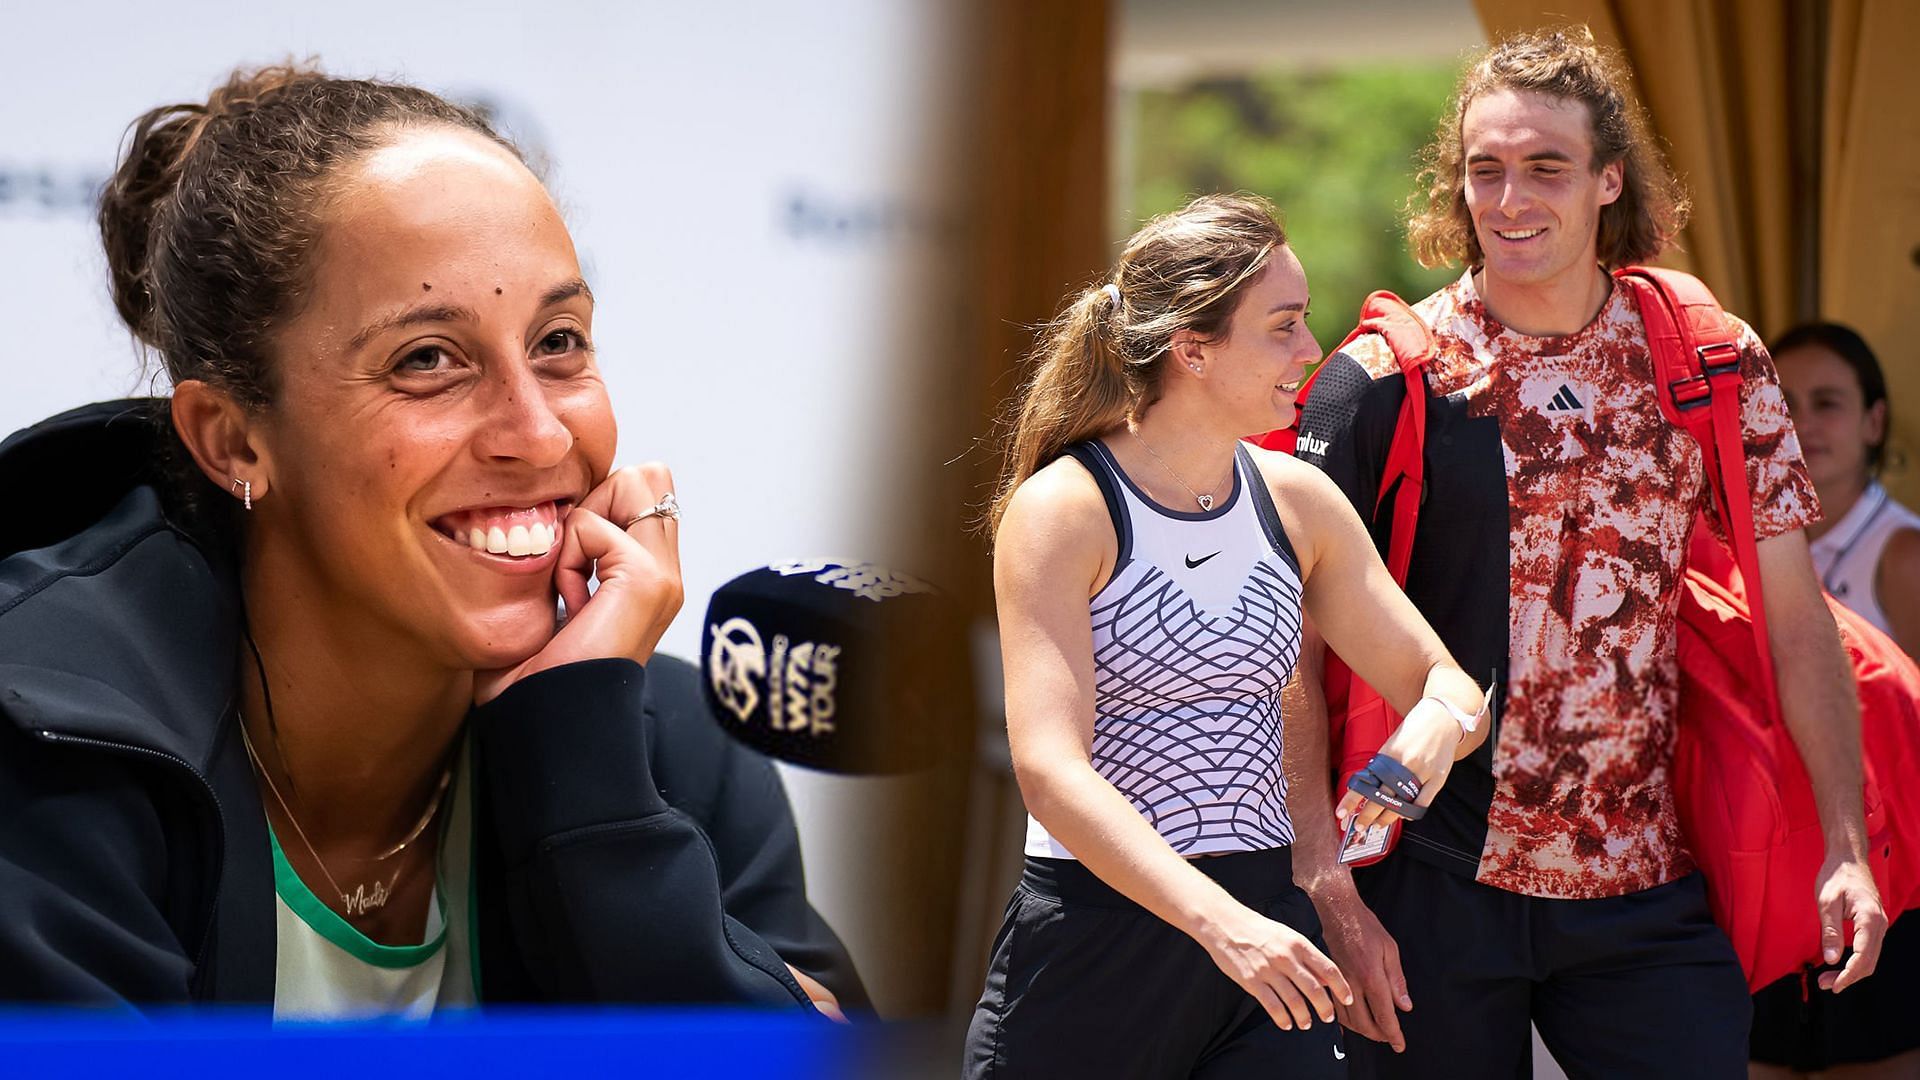 Madison Keys has stated that Stefanos Tsitsipas and Paula Badosa made her a little jealous about her own relationship.